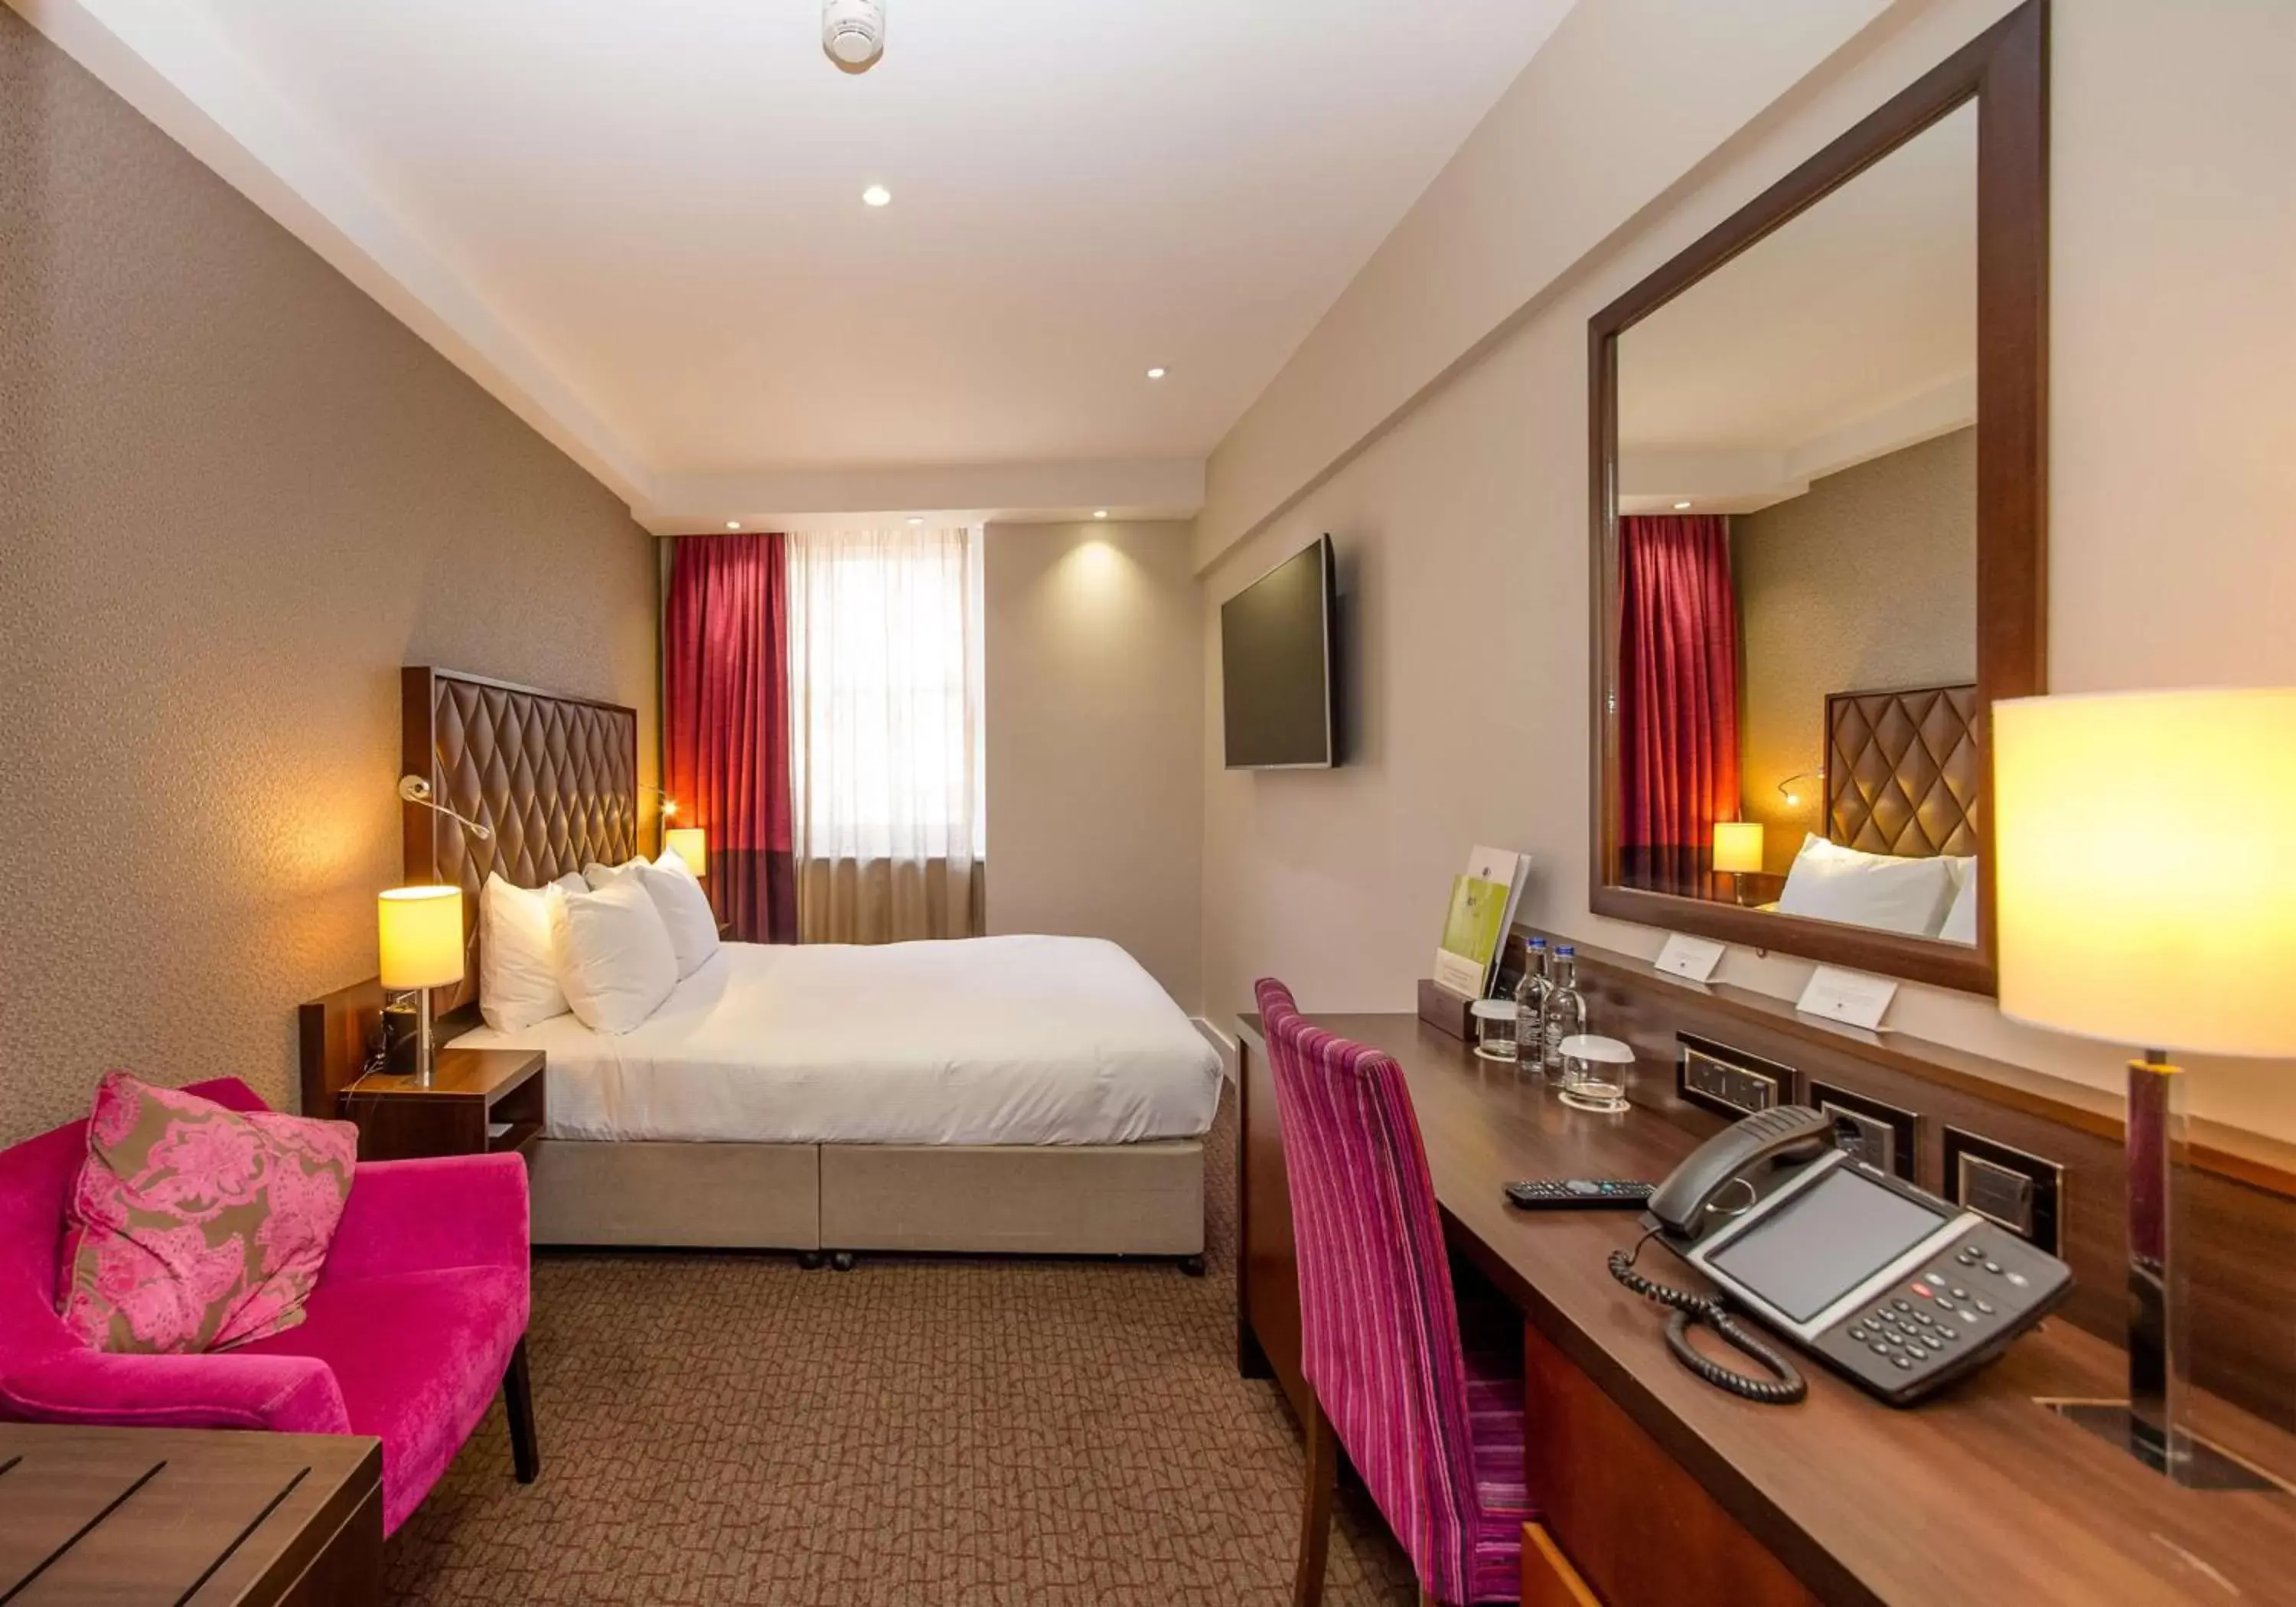 Bedroom in DoubleTree by Hilton Hotel London - Marble Arch